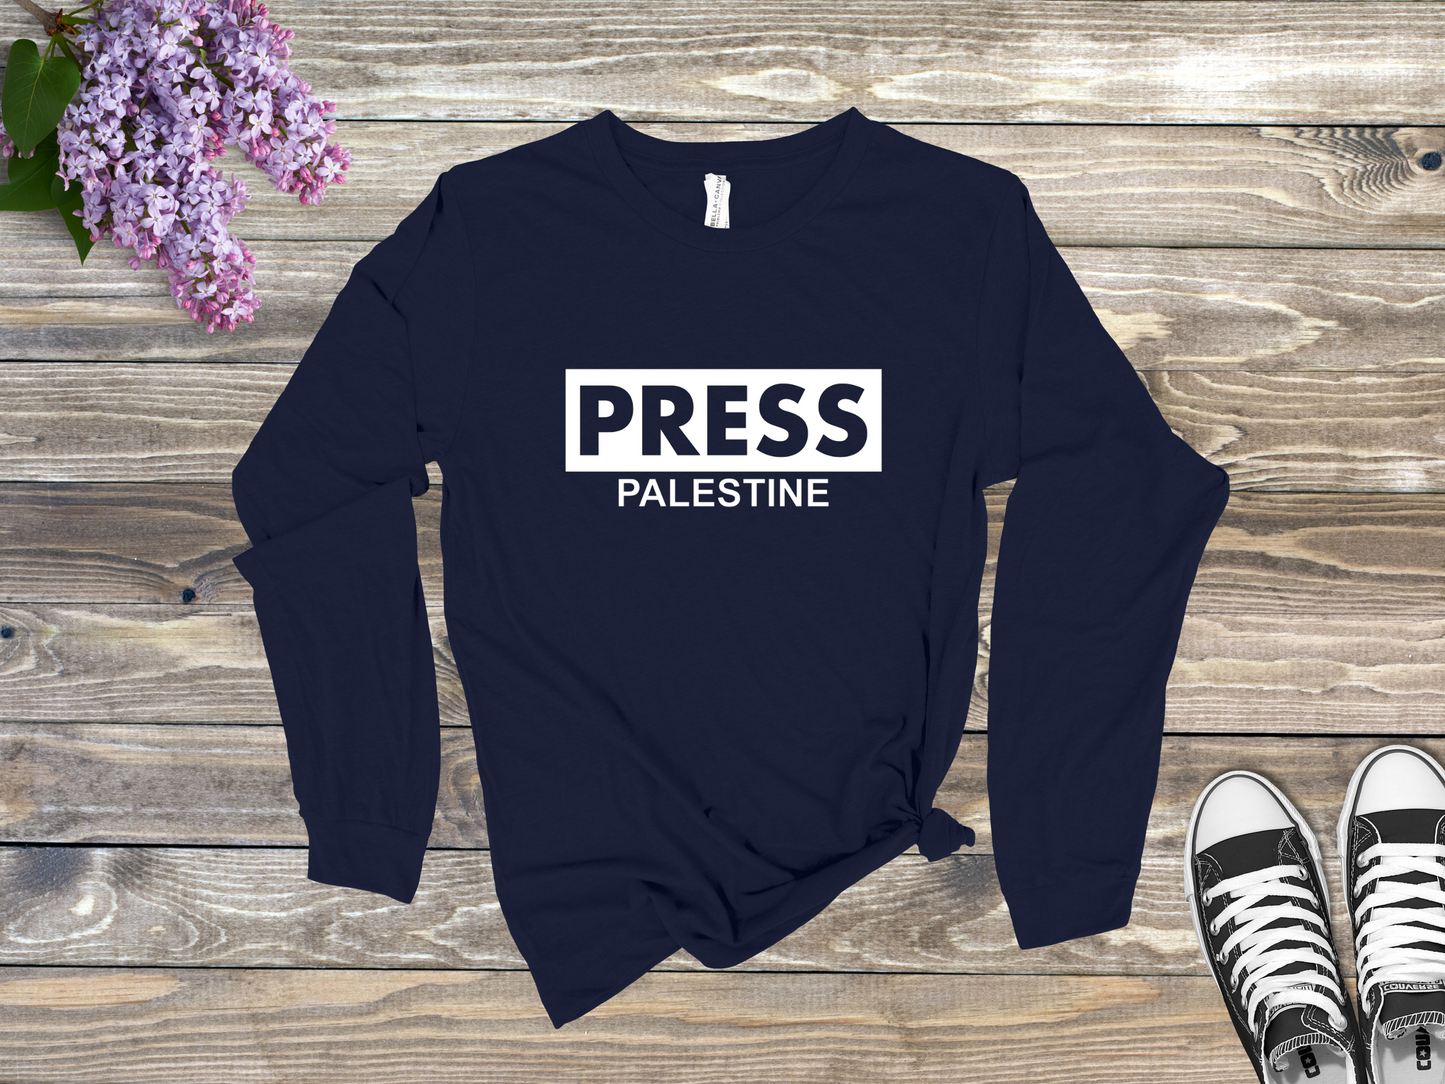 "Press" Long Sleeved T-Shirt Show Support for Palestinian Journalists